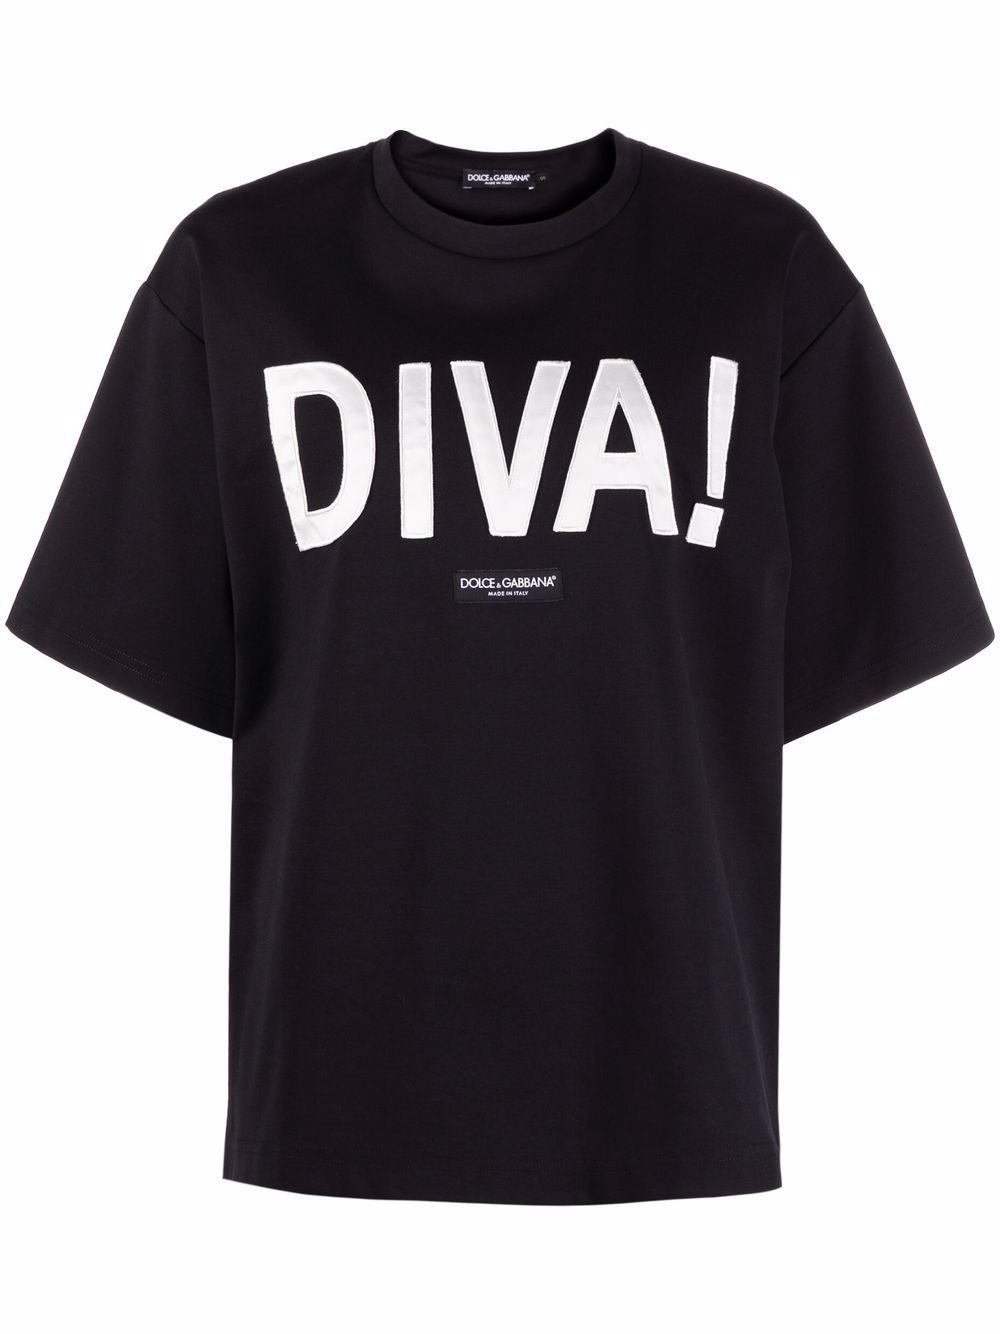 dolce & gabbana T-SHIRT DIVA available on montiboutique.com - 42194